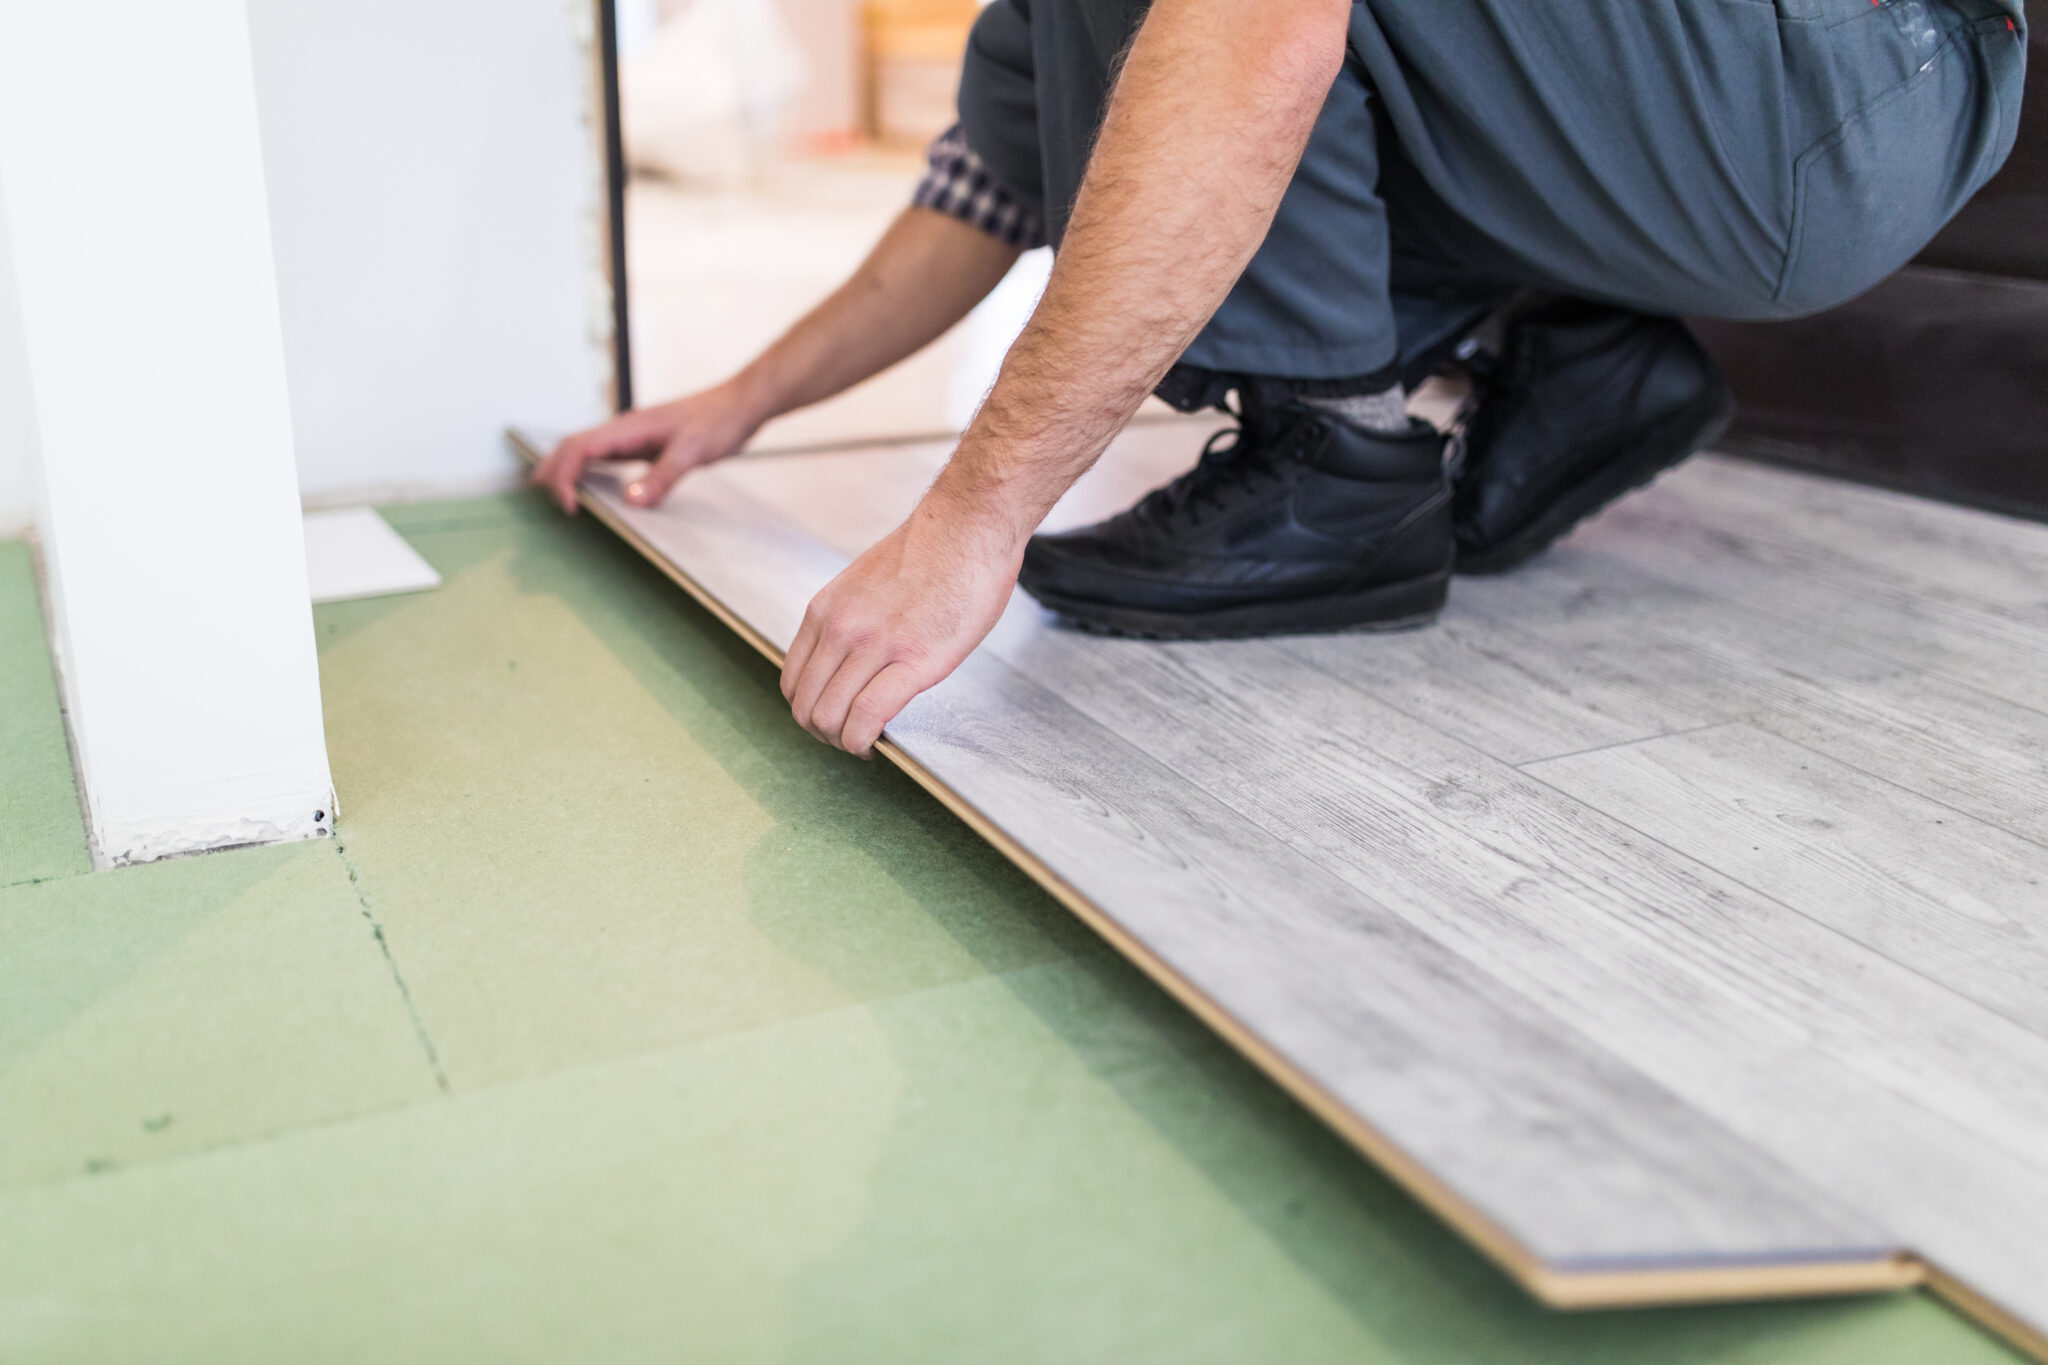 Young worker laying a floor with bright laminated flooring boards